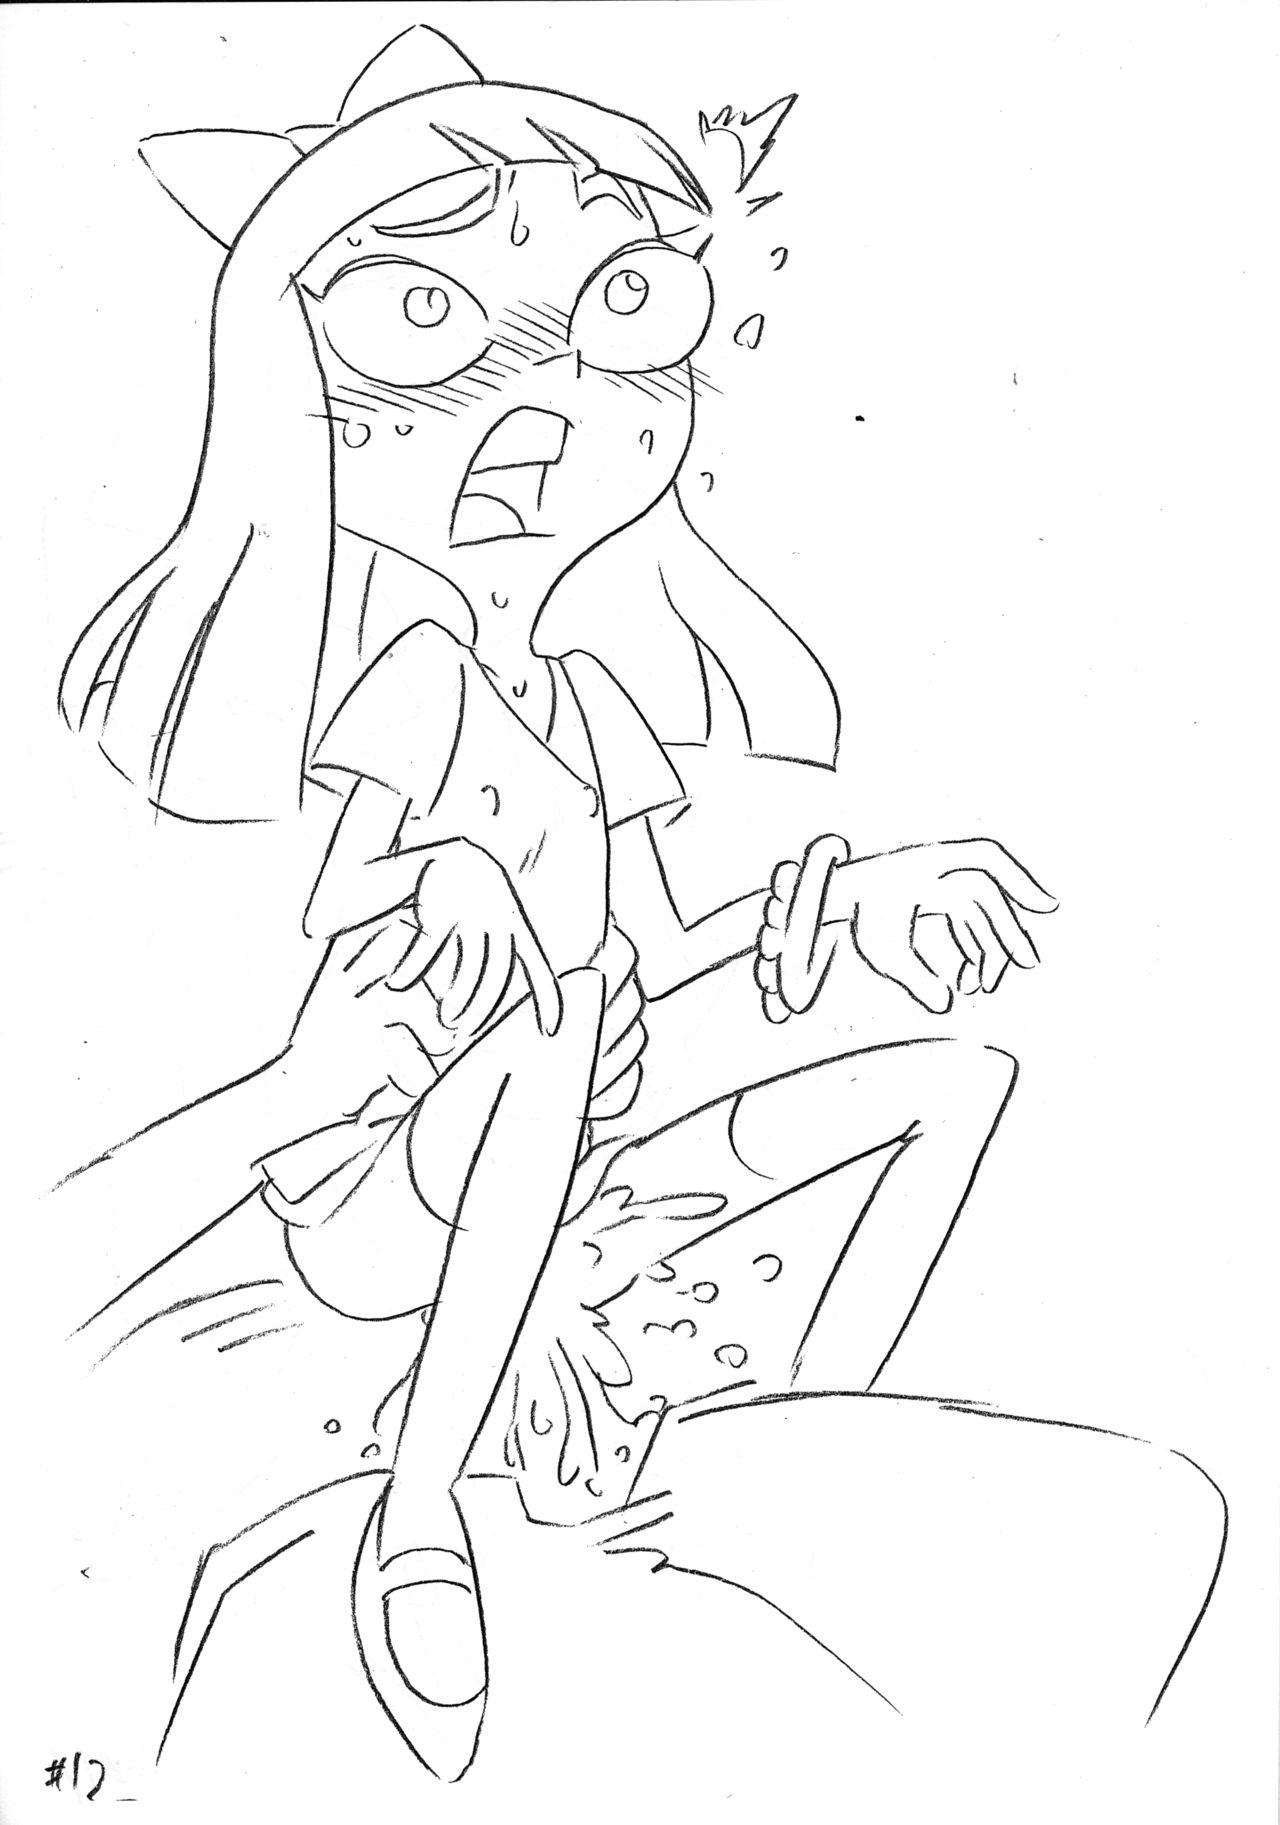 Rough Sex Psychosomatic Counterfeit Ex: Stacy in Early Age - Phineas and ferb Stunning - Page 11